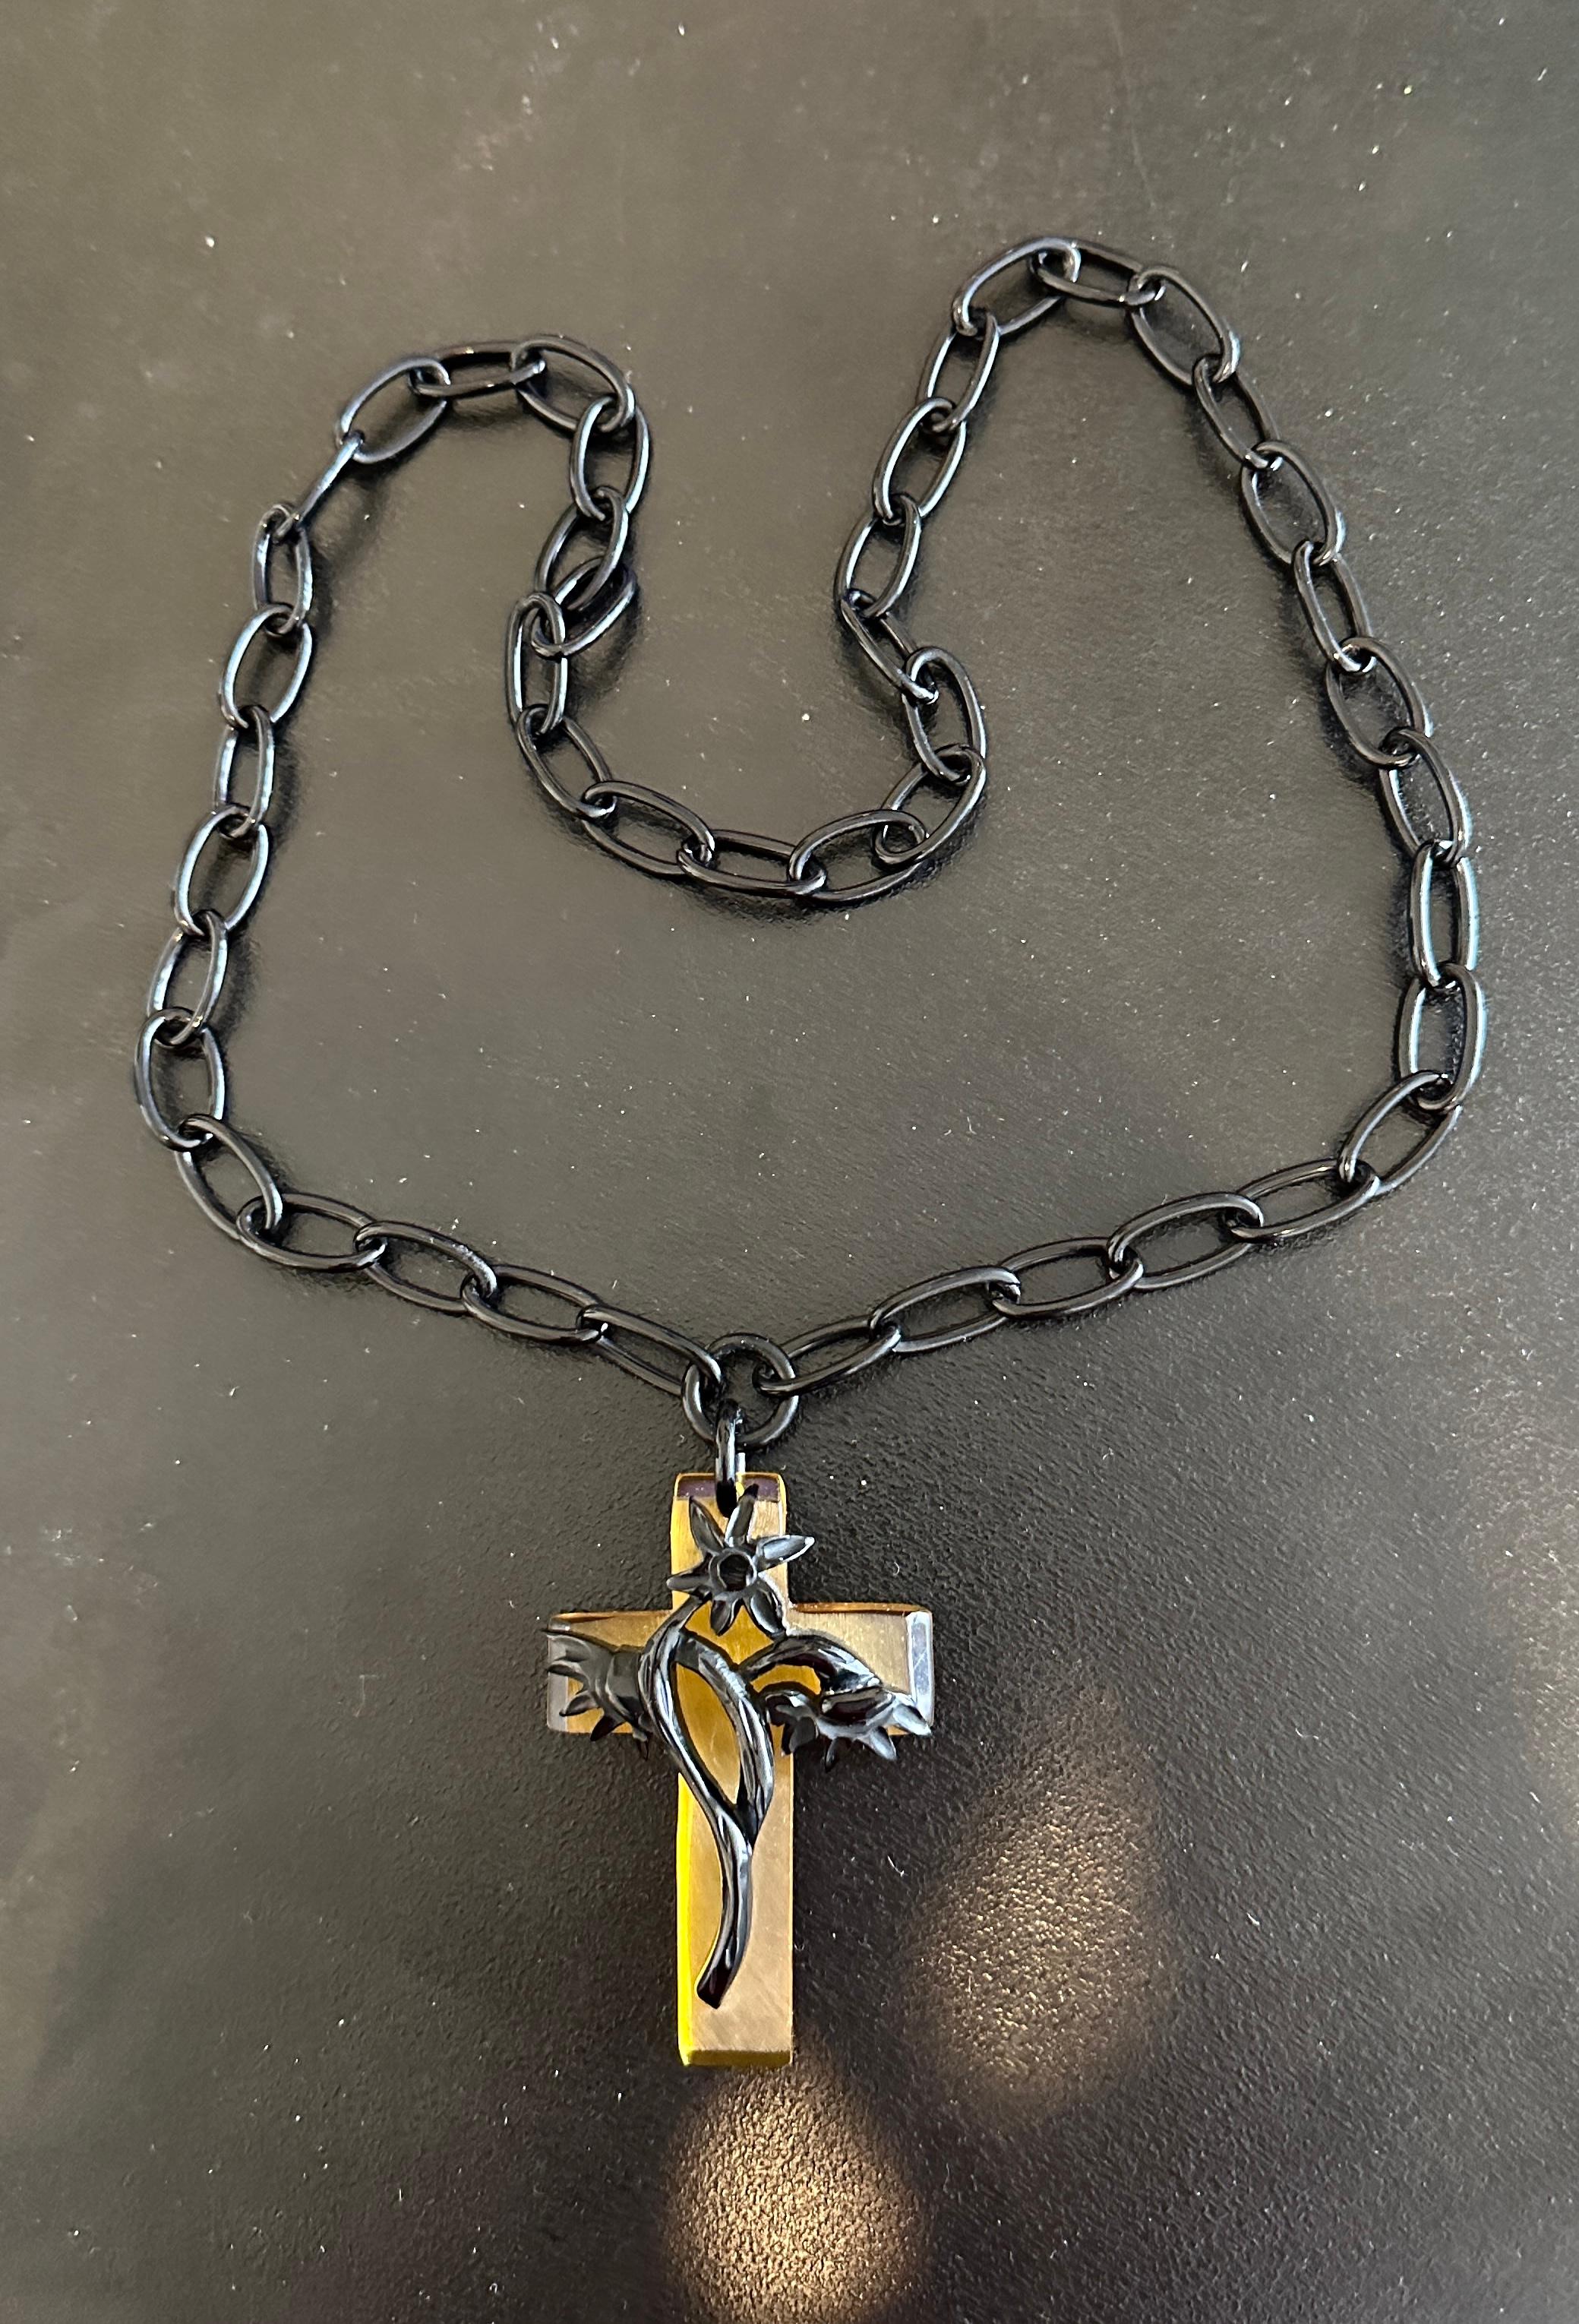 Rare Bakelite Cross With Flower And Chain Necklace Art Deco Wonderful! In Excellent Condition For Sale In New York, NY